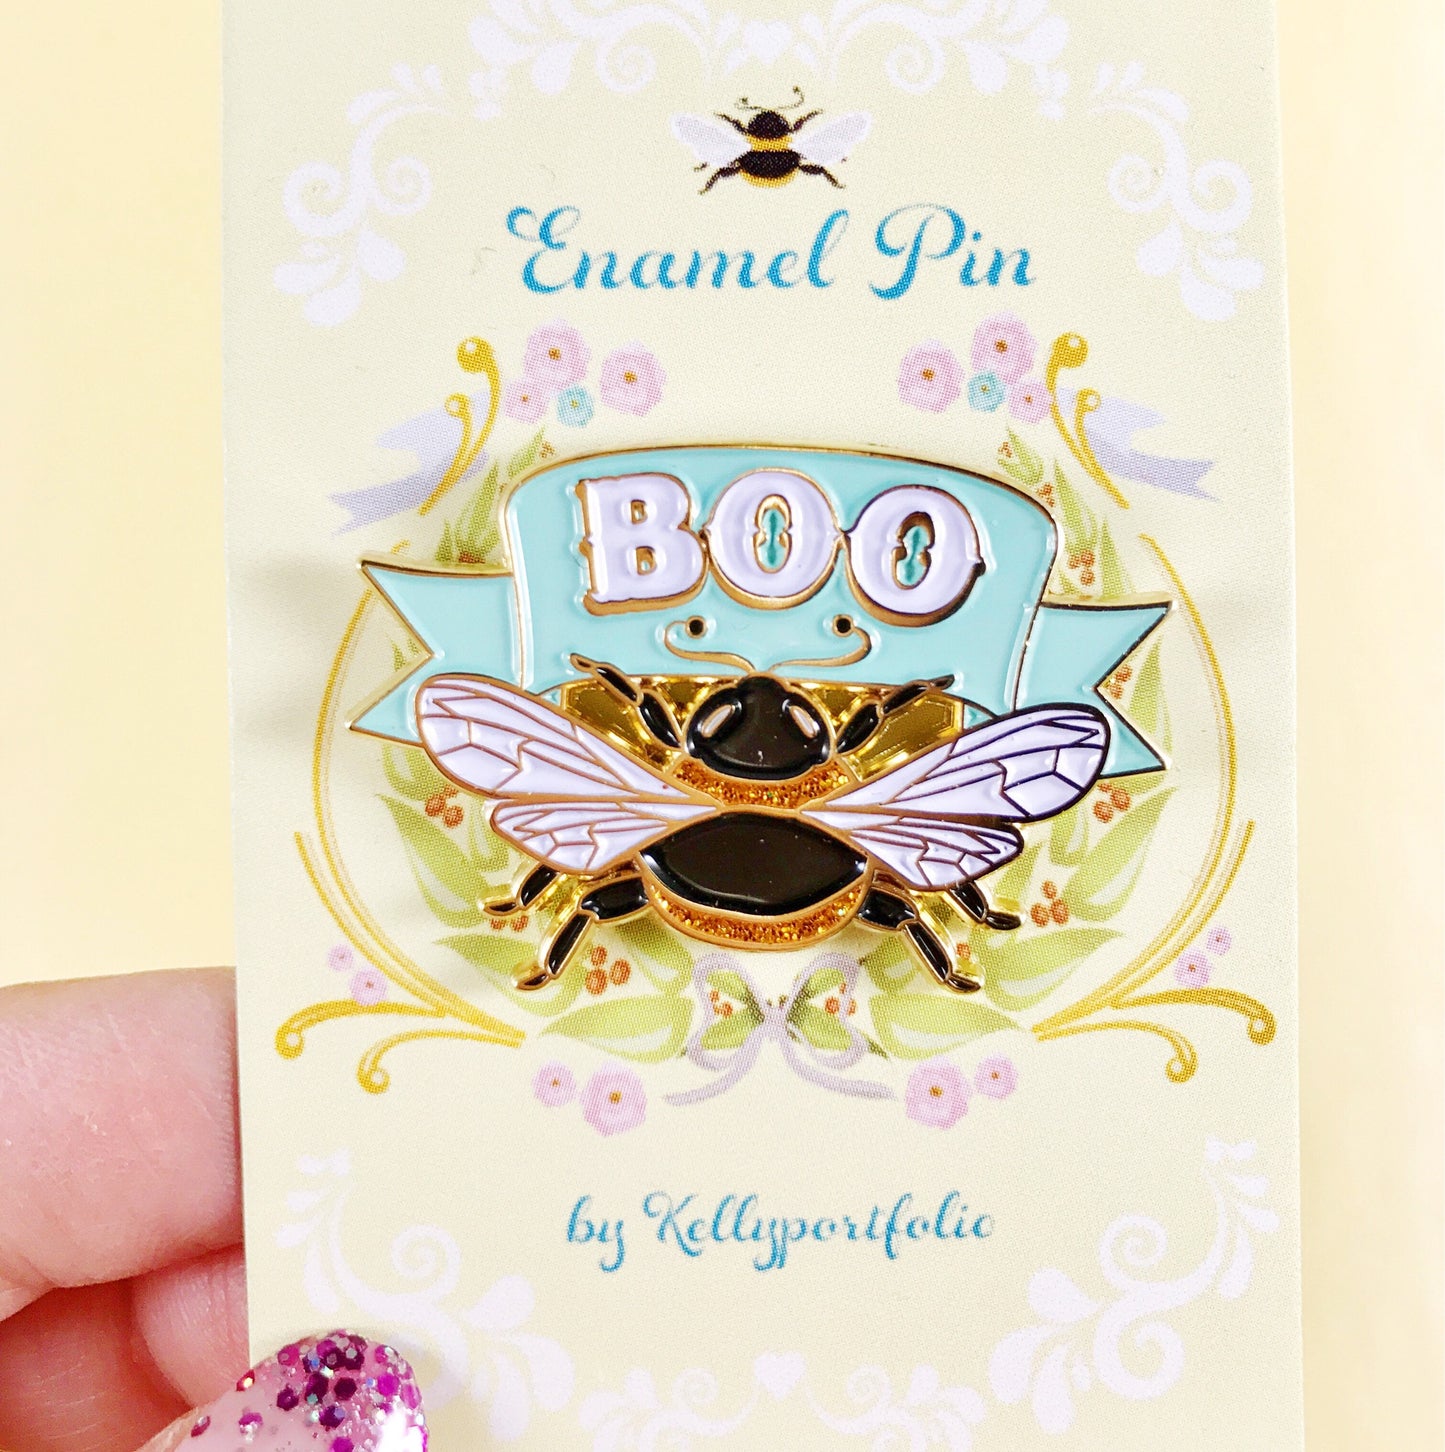 Boo Bee soft enamel pin with glitter highlights!